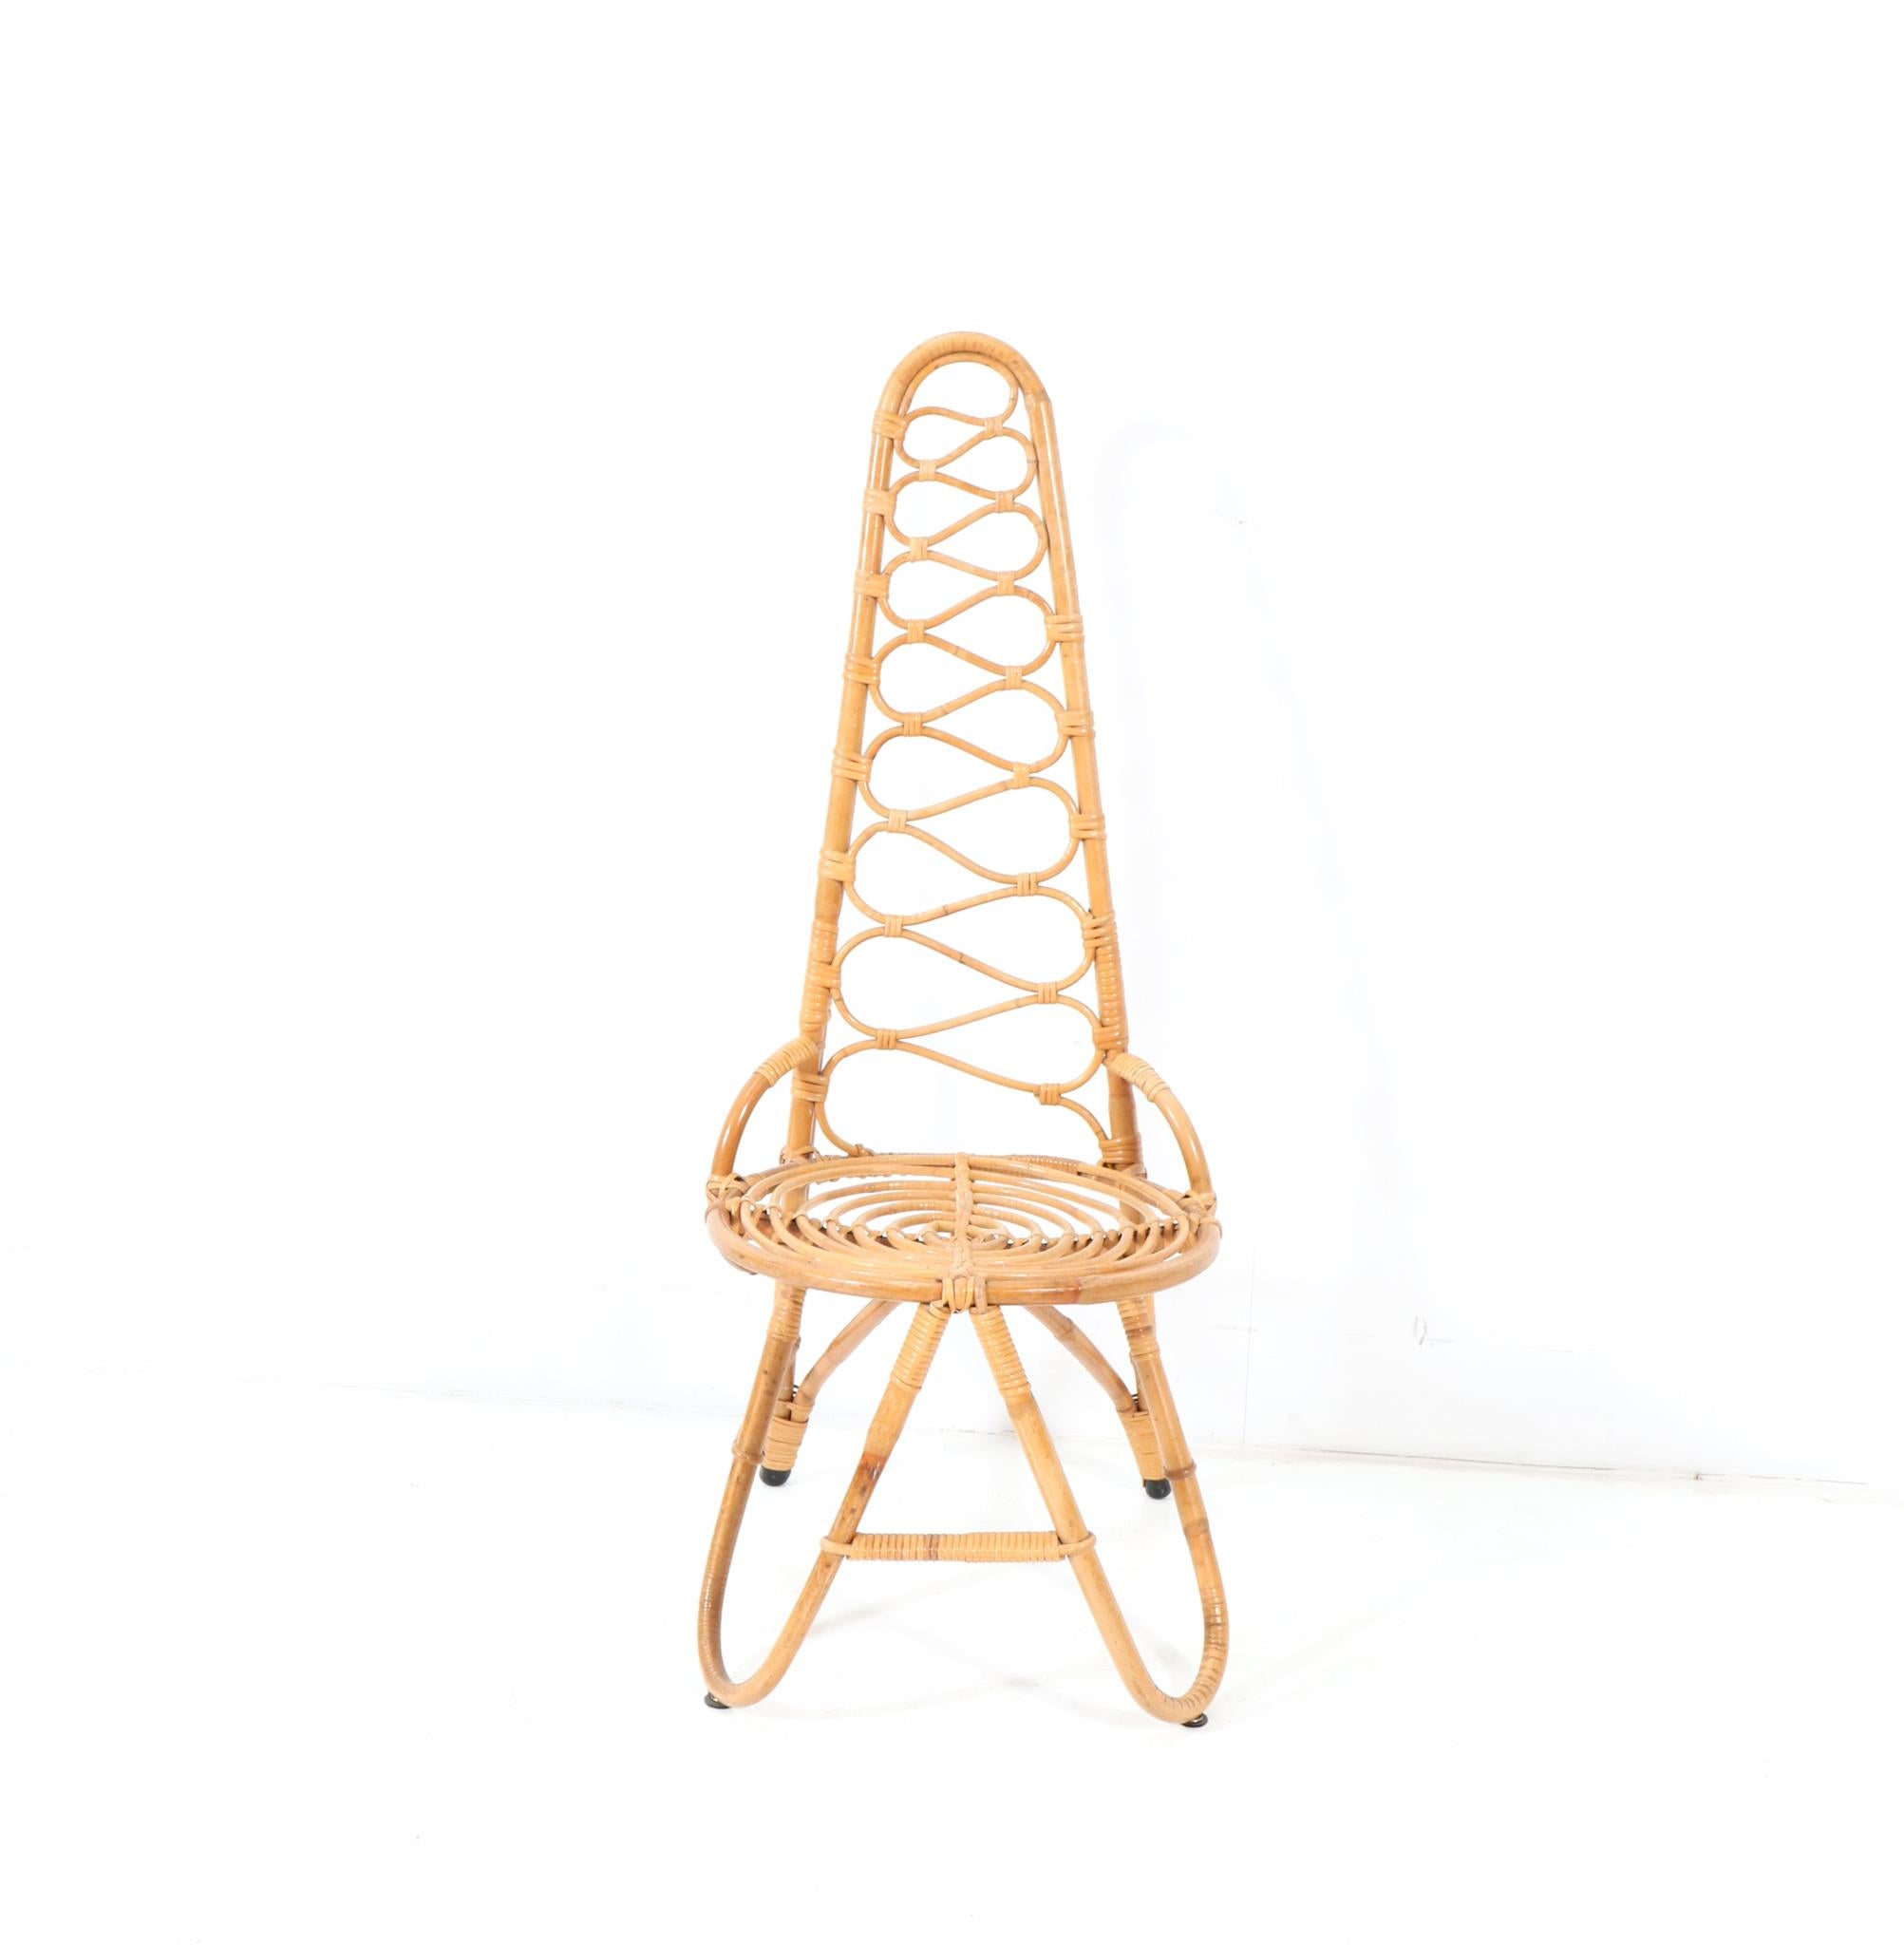 Dutch Mid-Century Modern Bamboo and Rattan Chair by Dirk van Sliedrecht for Rohe